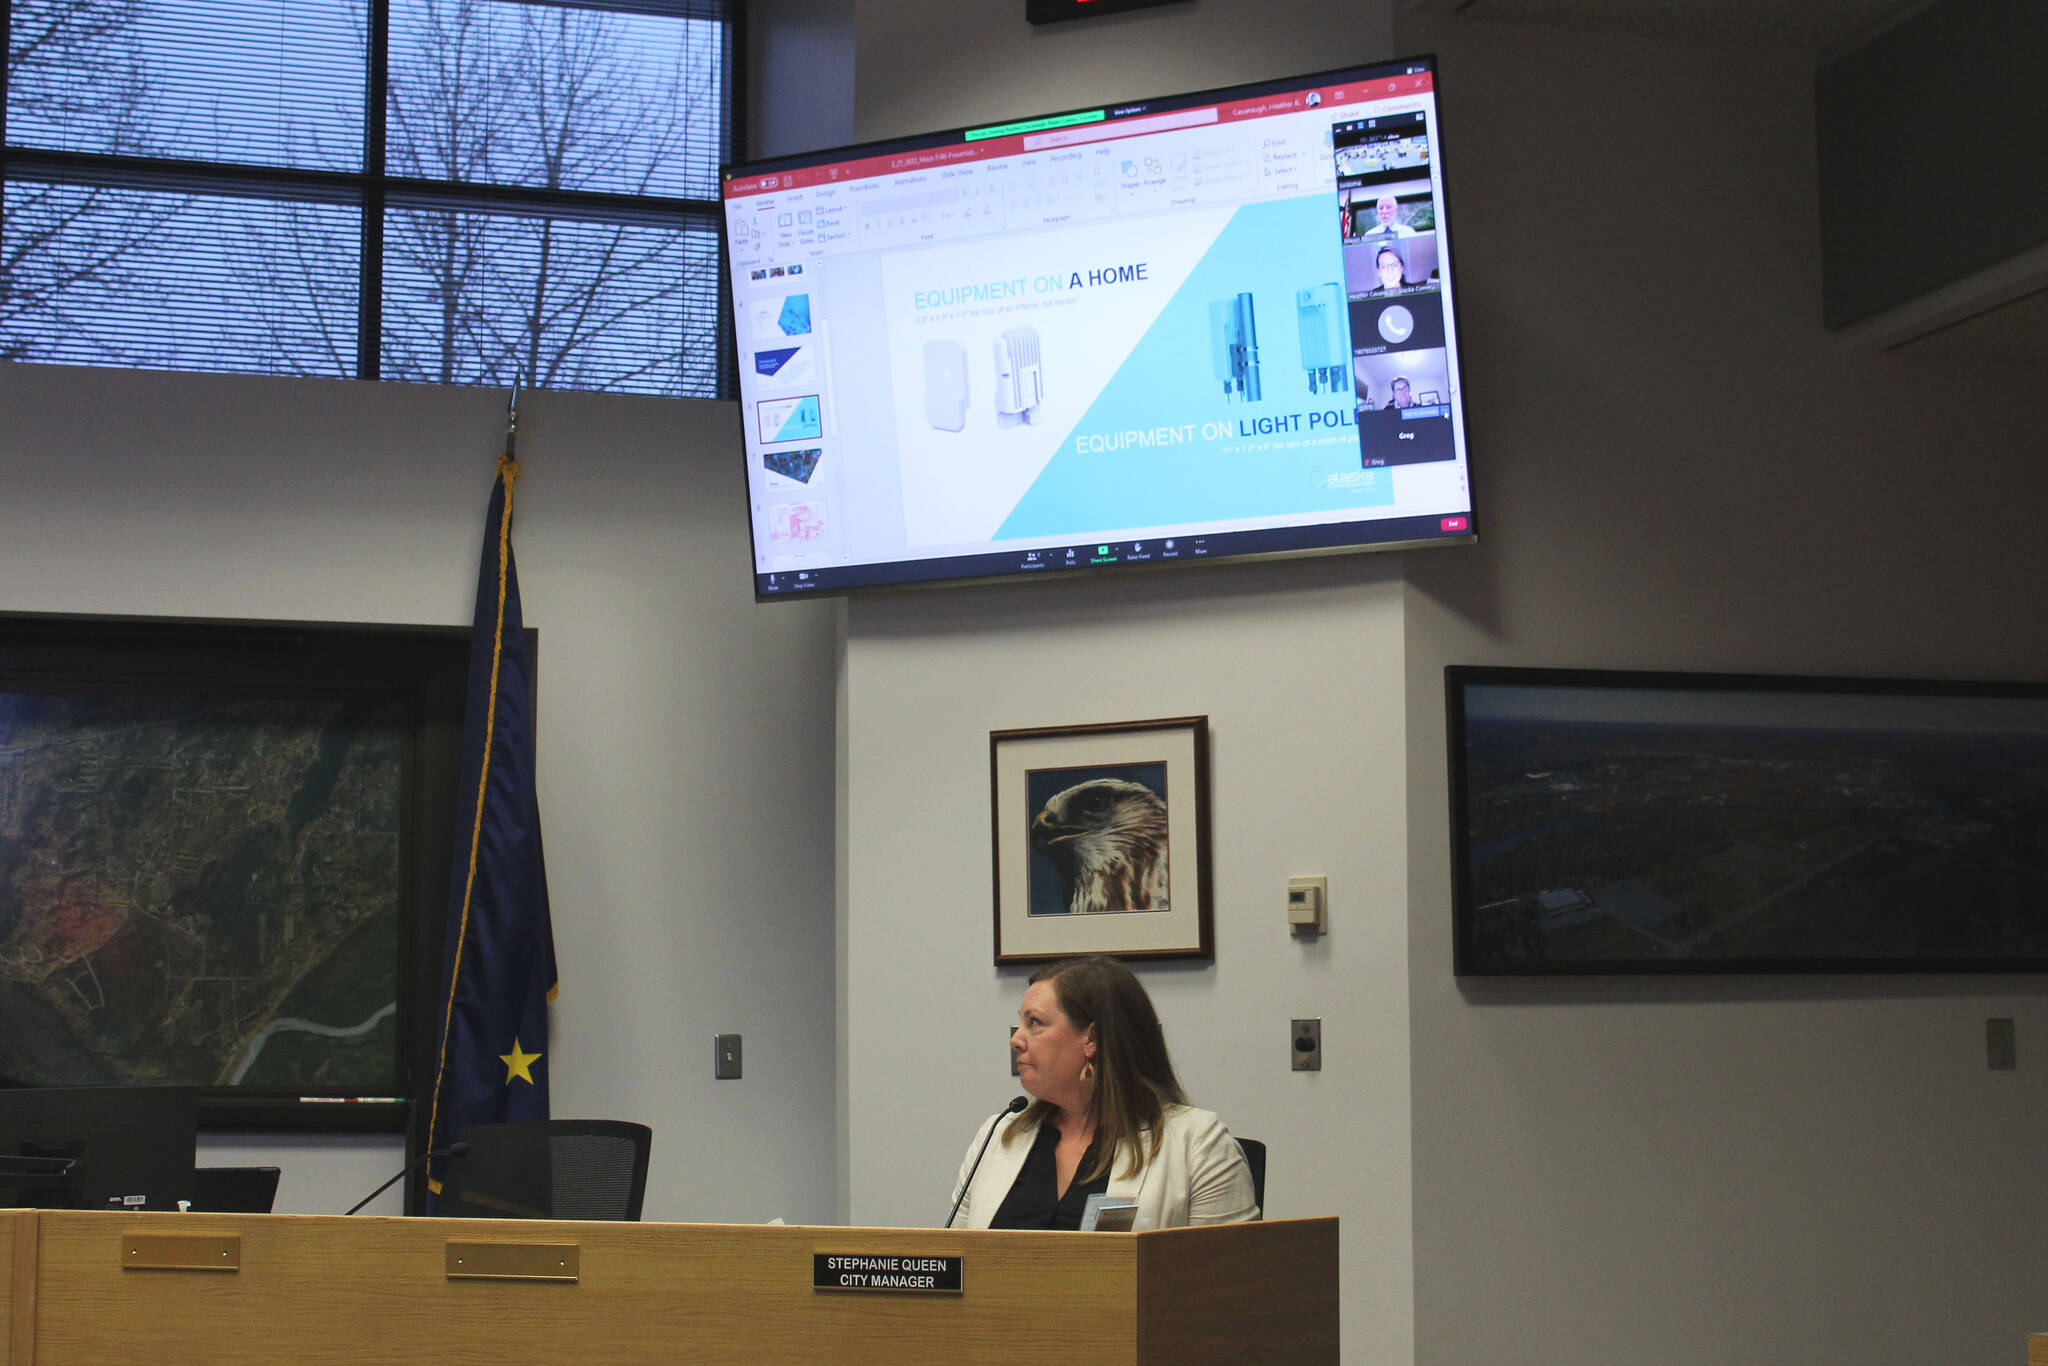 Ashlyn O’Hara/Peninsula Clarion 
Soldotna City Manager Stephanie Queen listens to a presentation from Alaska Communications during a meeting of the Soldotna City Council on Wednesday, March 9, 2022 in Soldotna, Alaska.